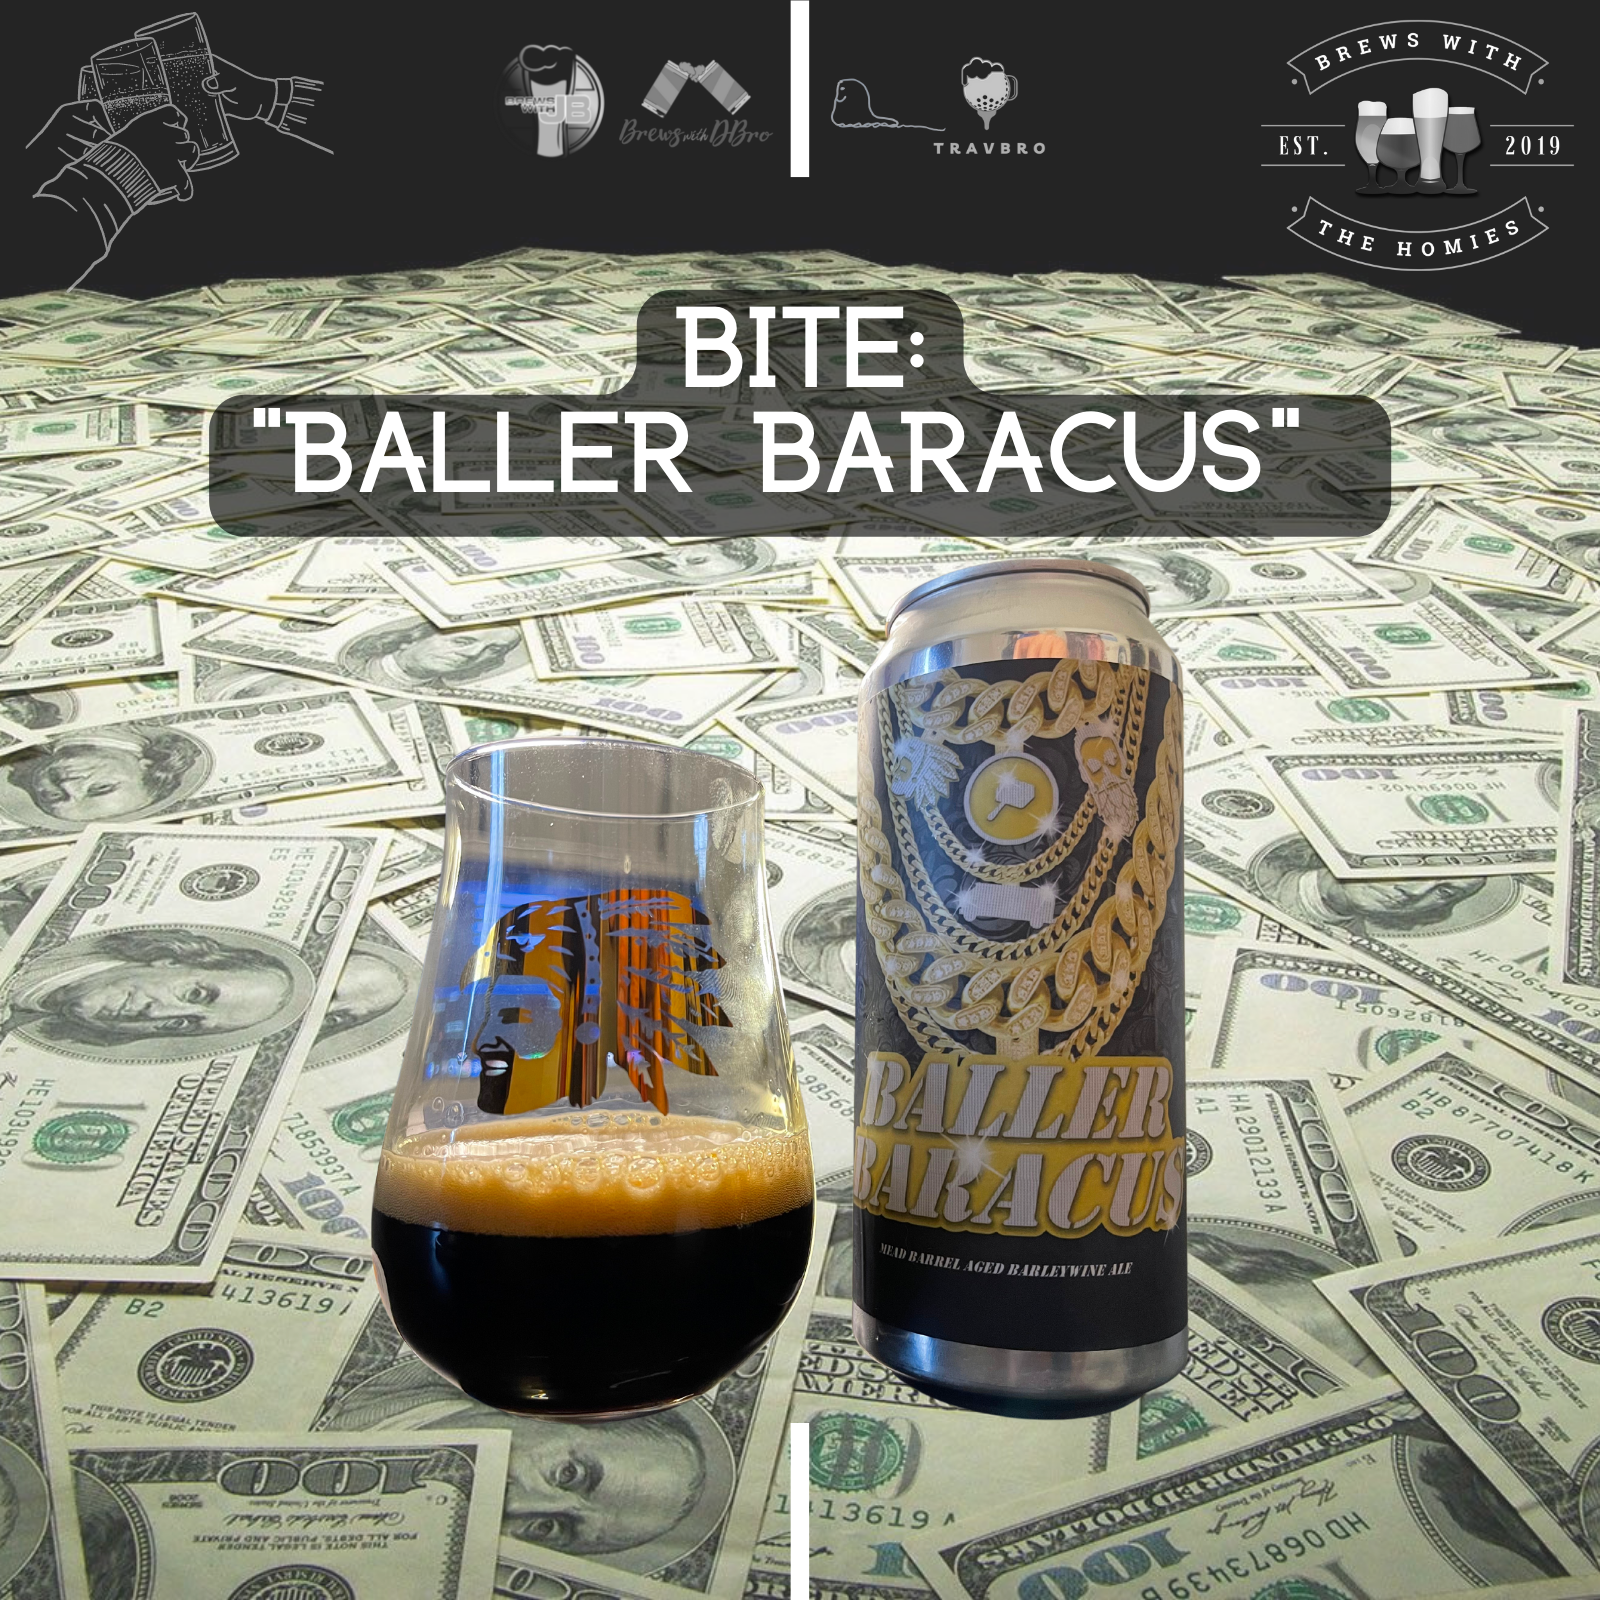 Bite: "Baller Baracus" from Beer Zombies/Mason Ale Works/Horus